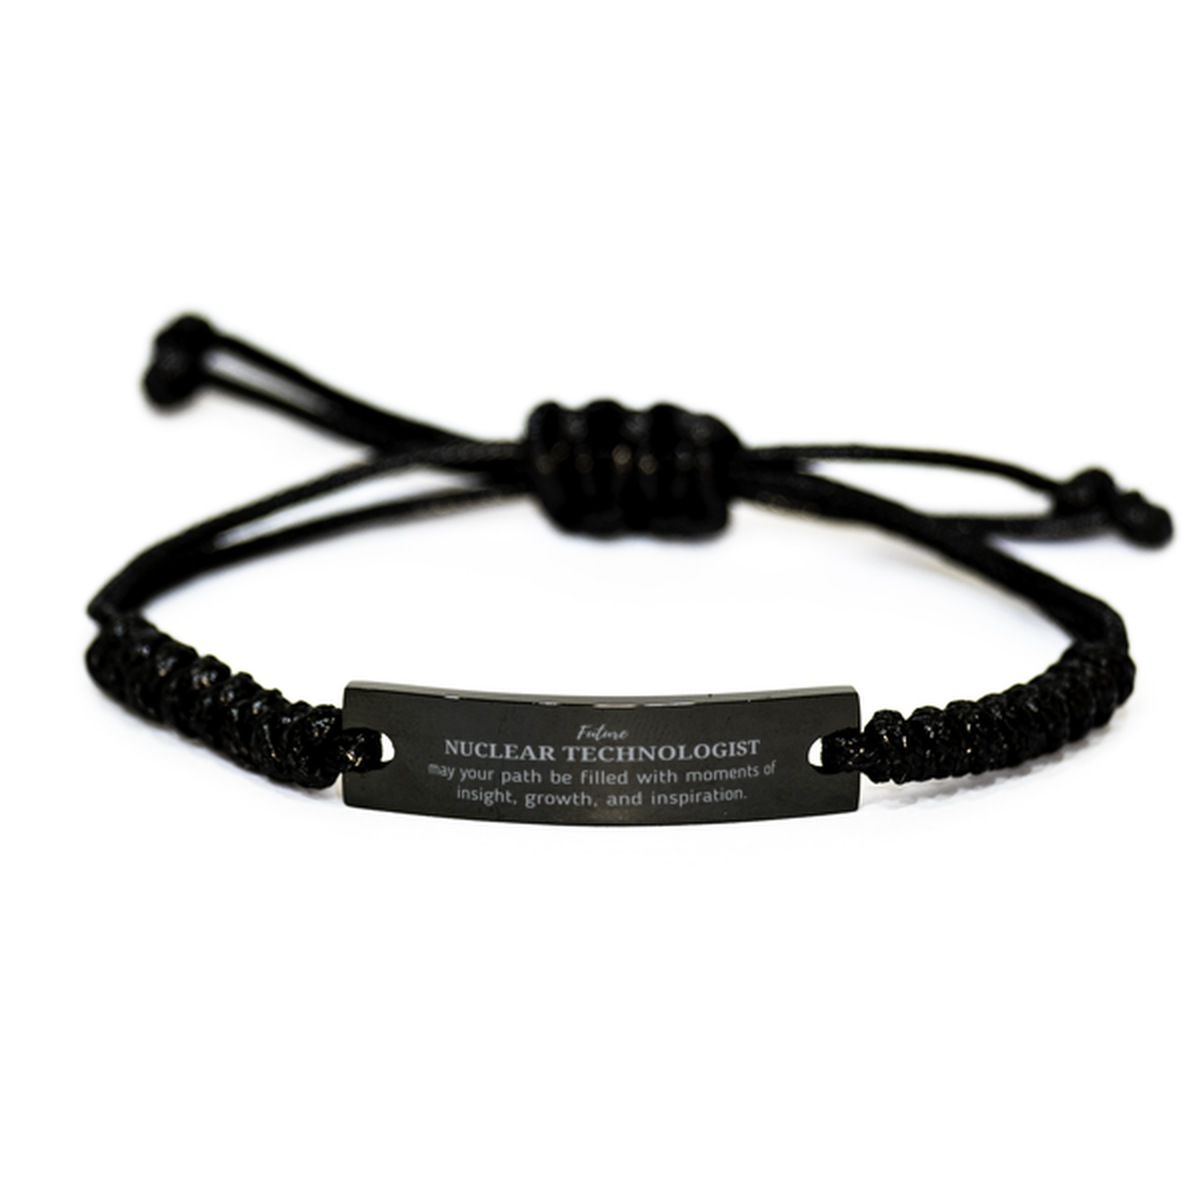 Future Nuclear Technologist Gifts, May your path be filled with moments of insight, Graduation Gifts for New Nuclear Technologist, Christmas Unique Black Rope Bracelet For Men, Women, Friends